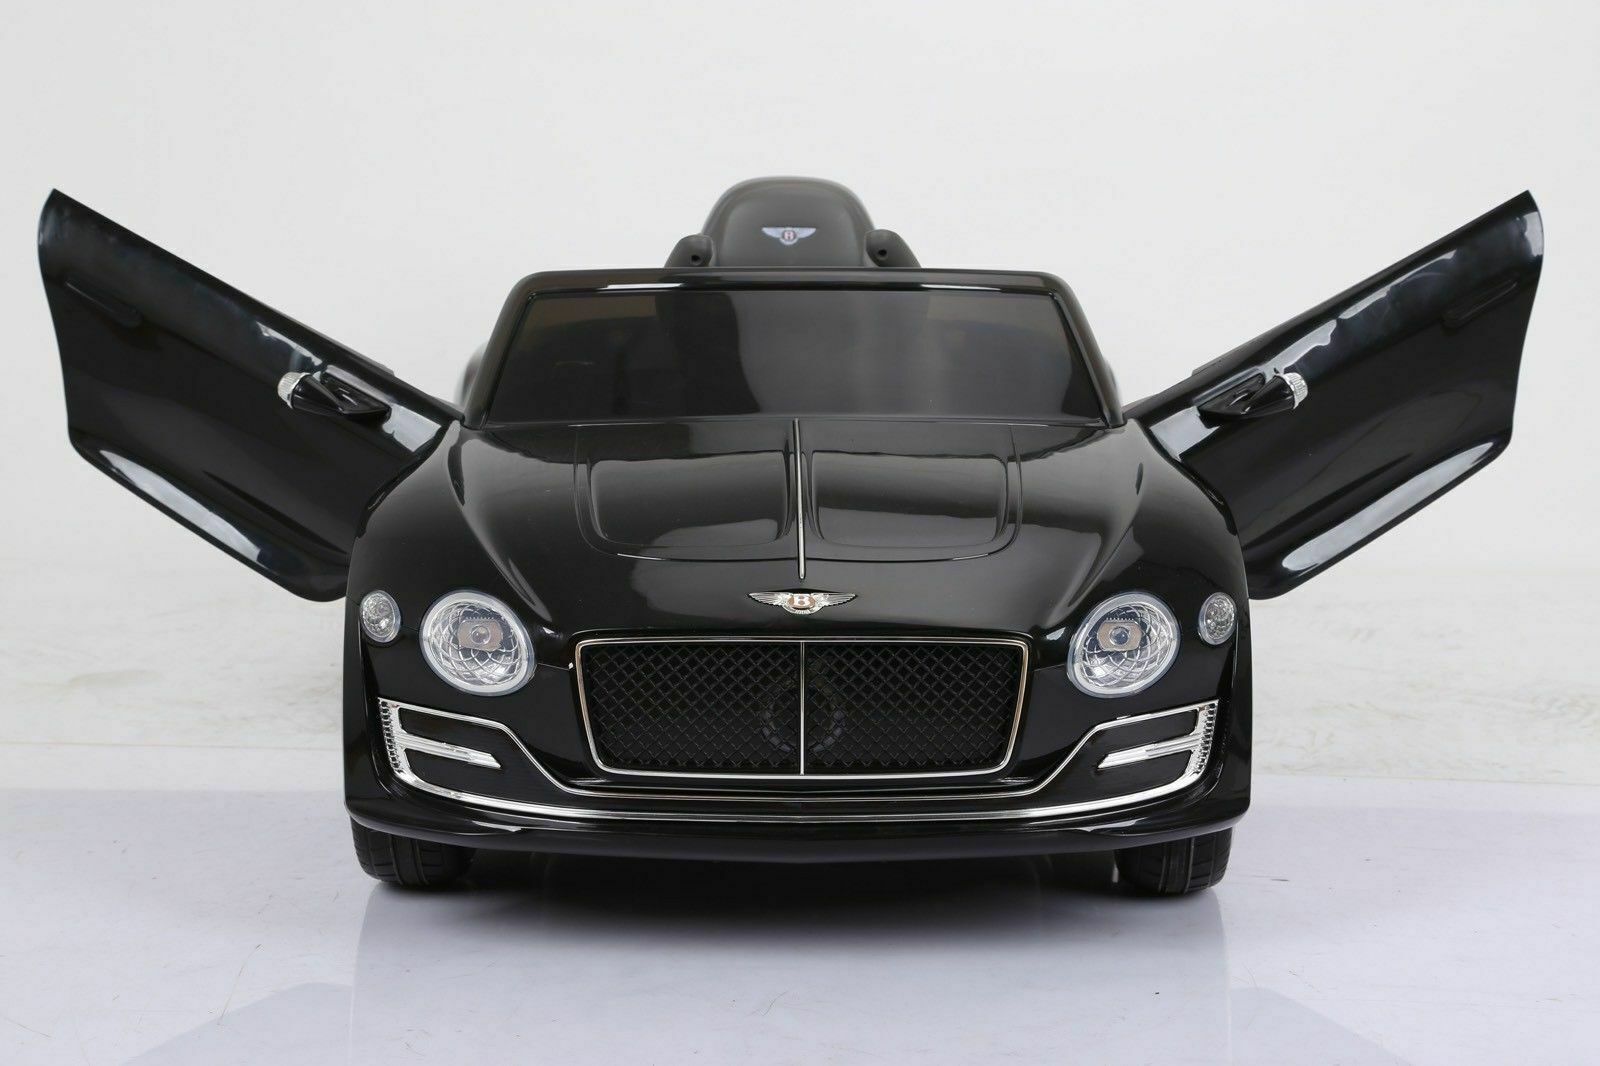 Primary image for Licensed Bentley Style Kids Electric Ride On Car Toys 12V 2.4G Remote Control